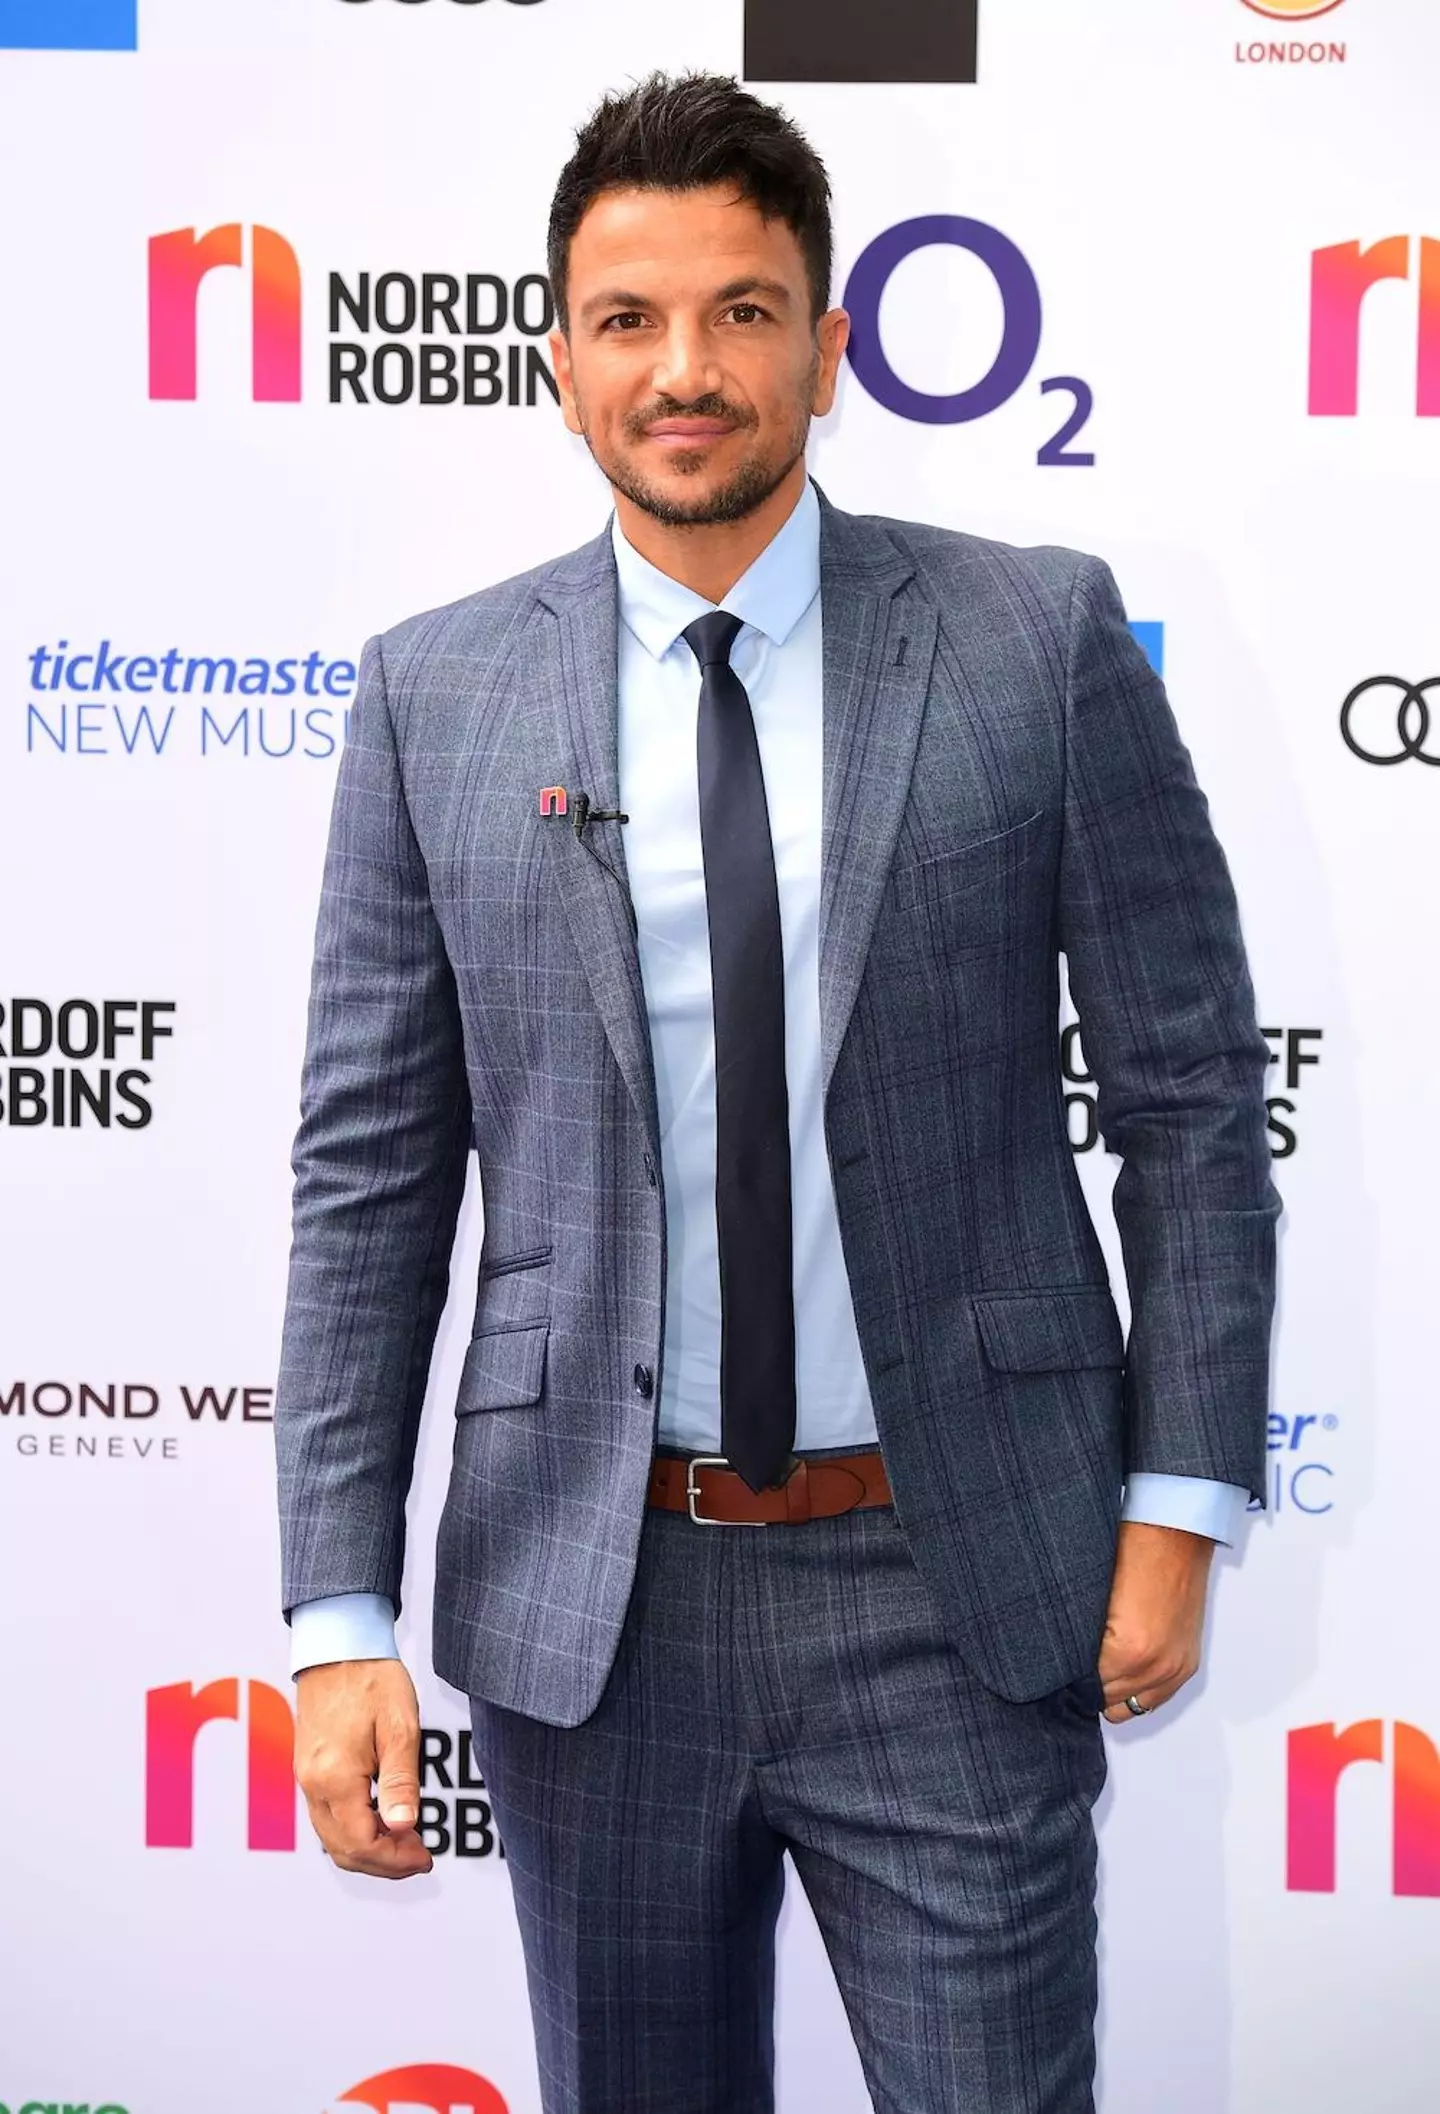 Peter Andre doesn't think it's the most wonderful time of the year.